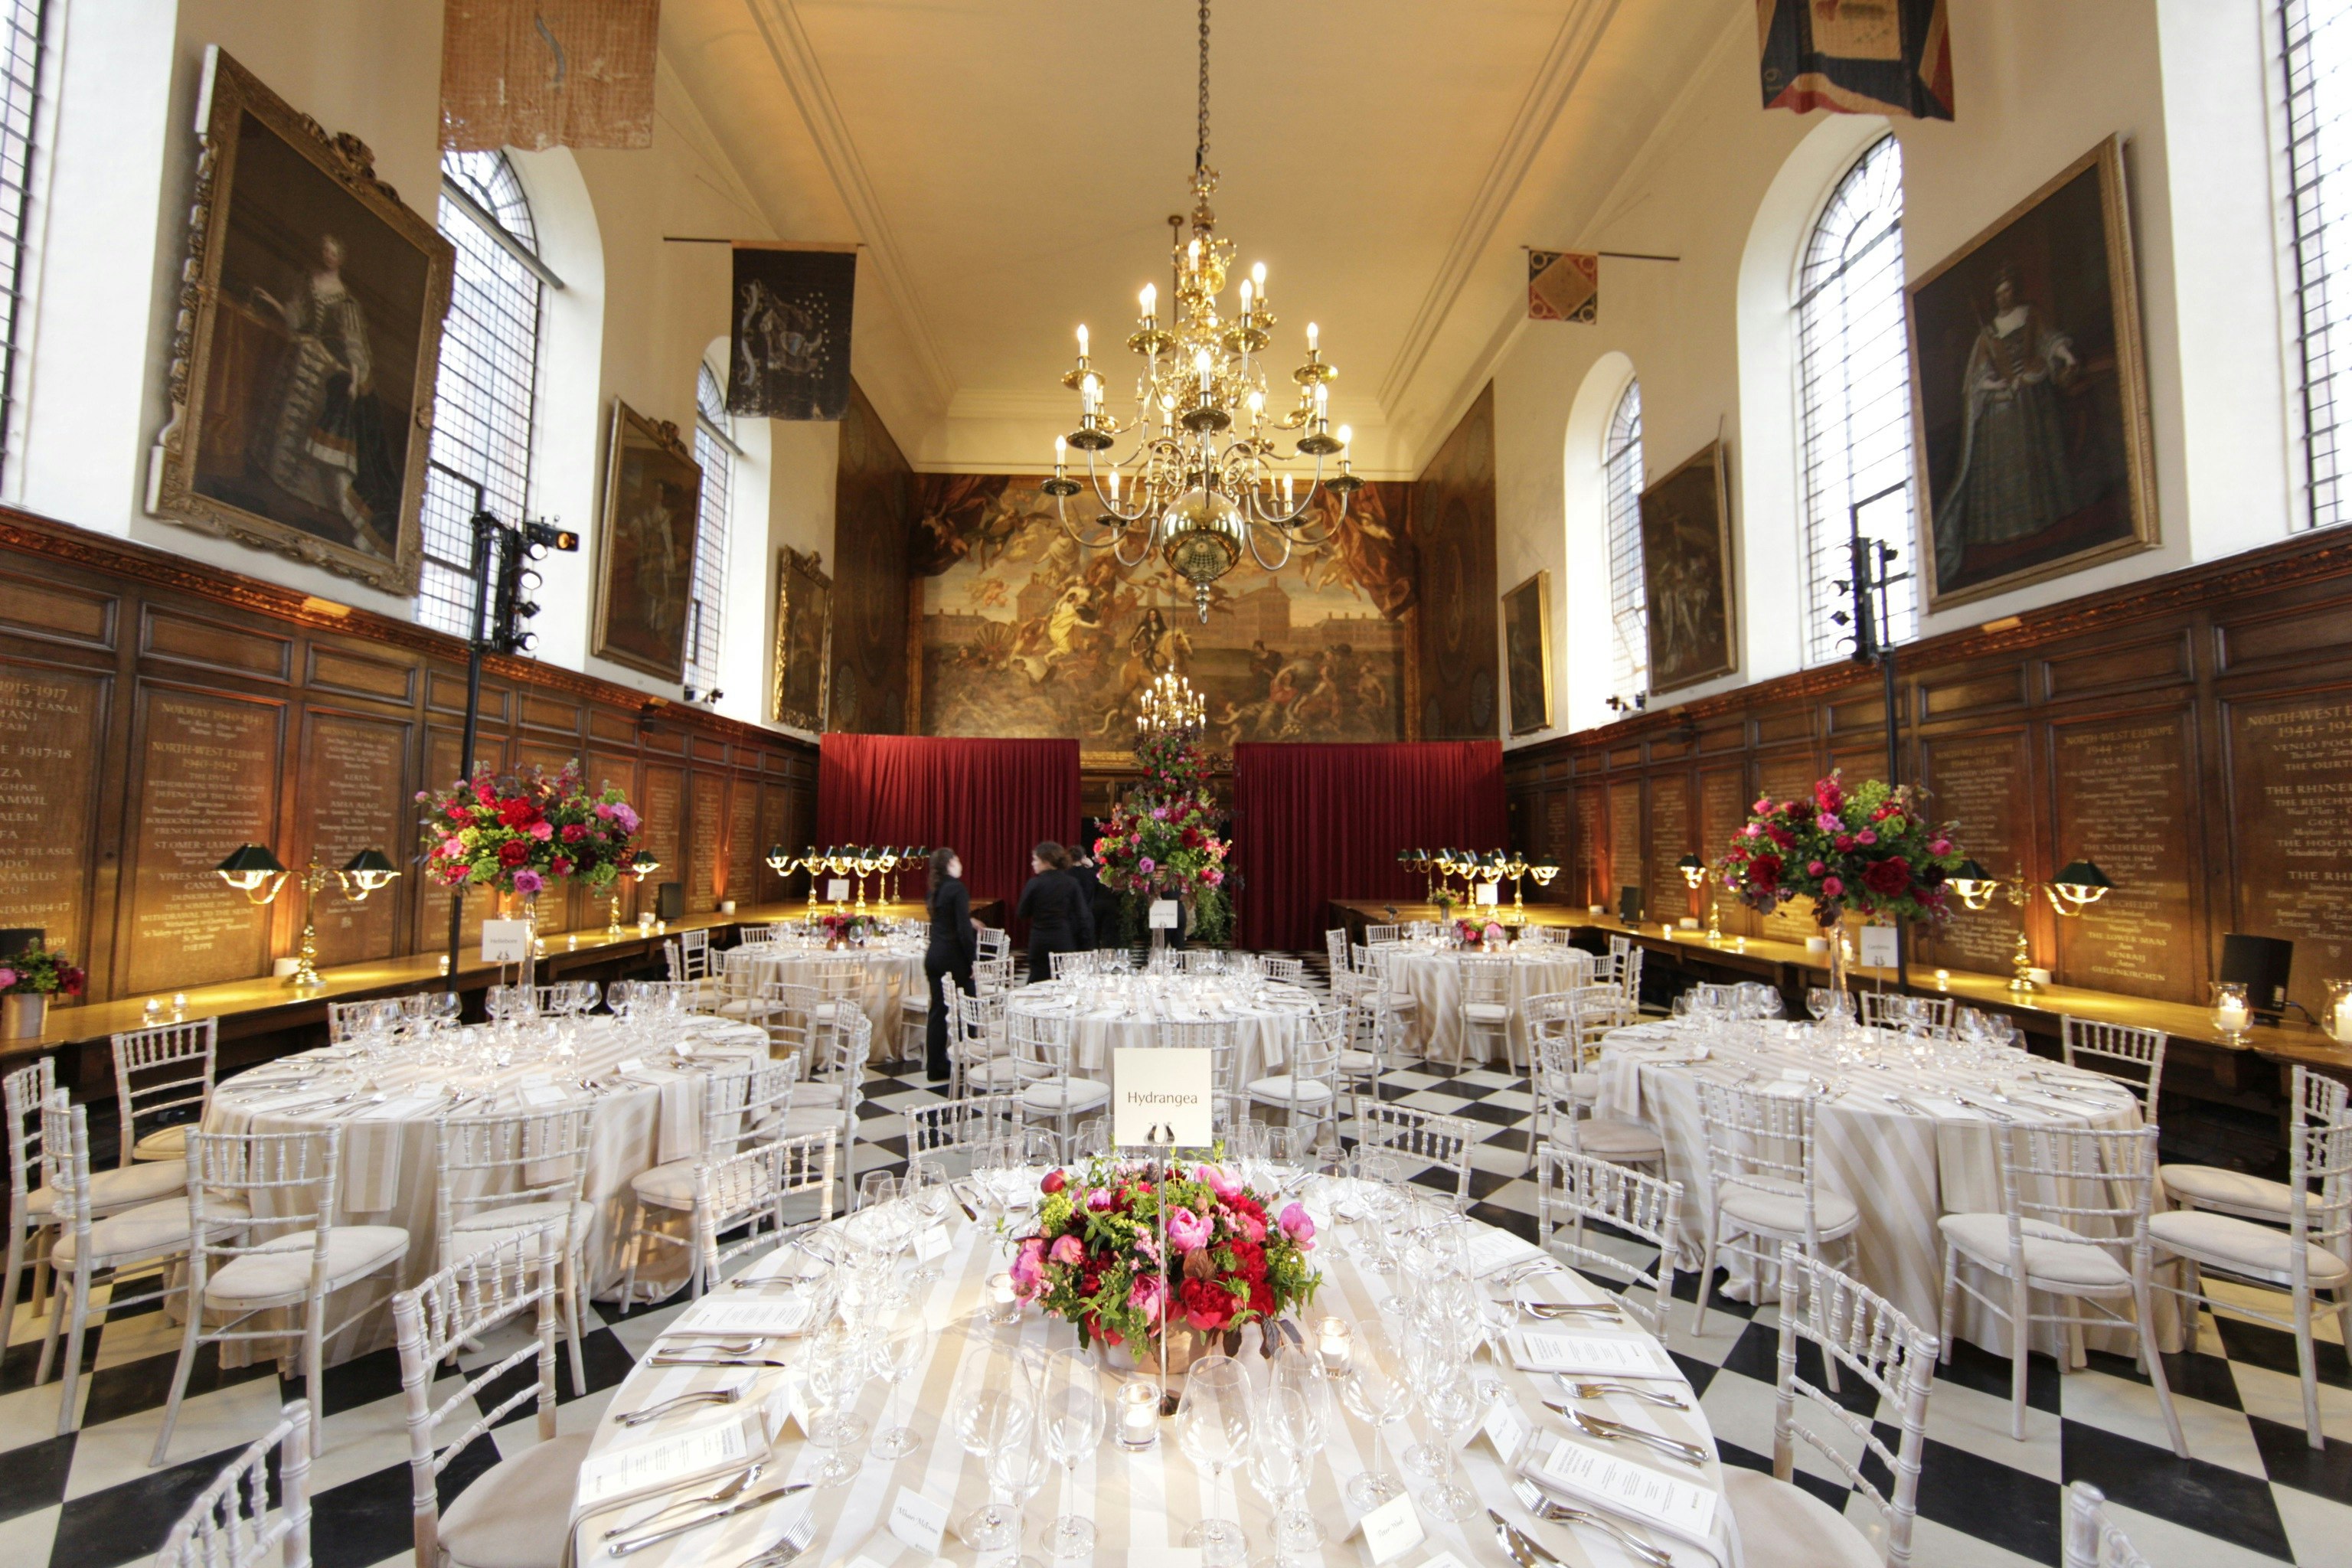 Royal Hospital Chelsea - The Great Hall image 5